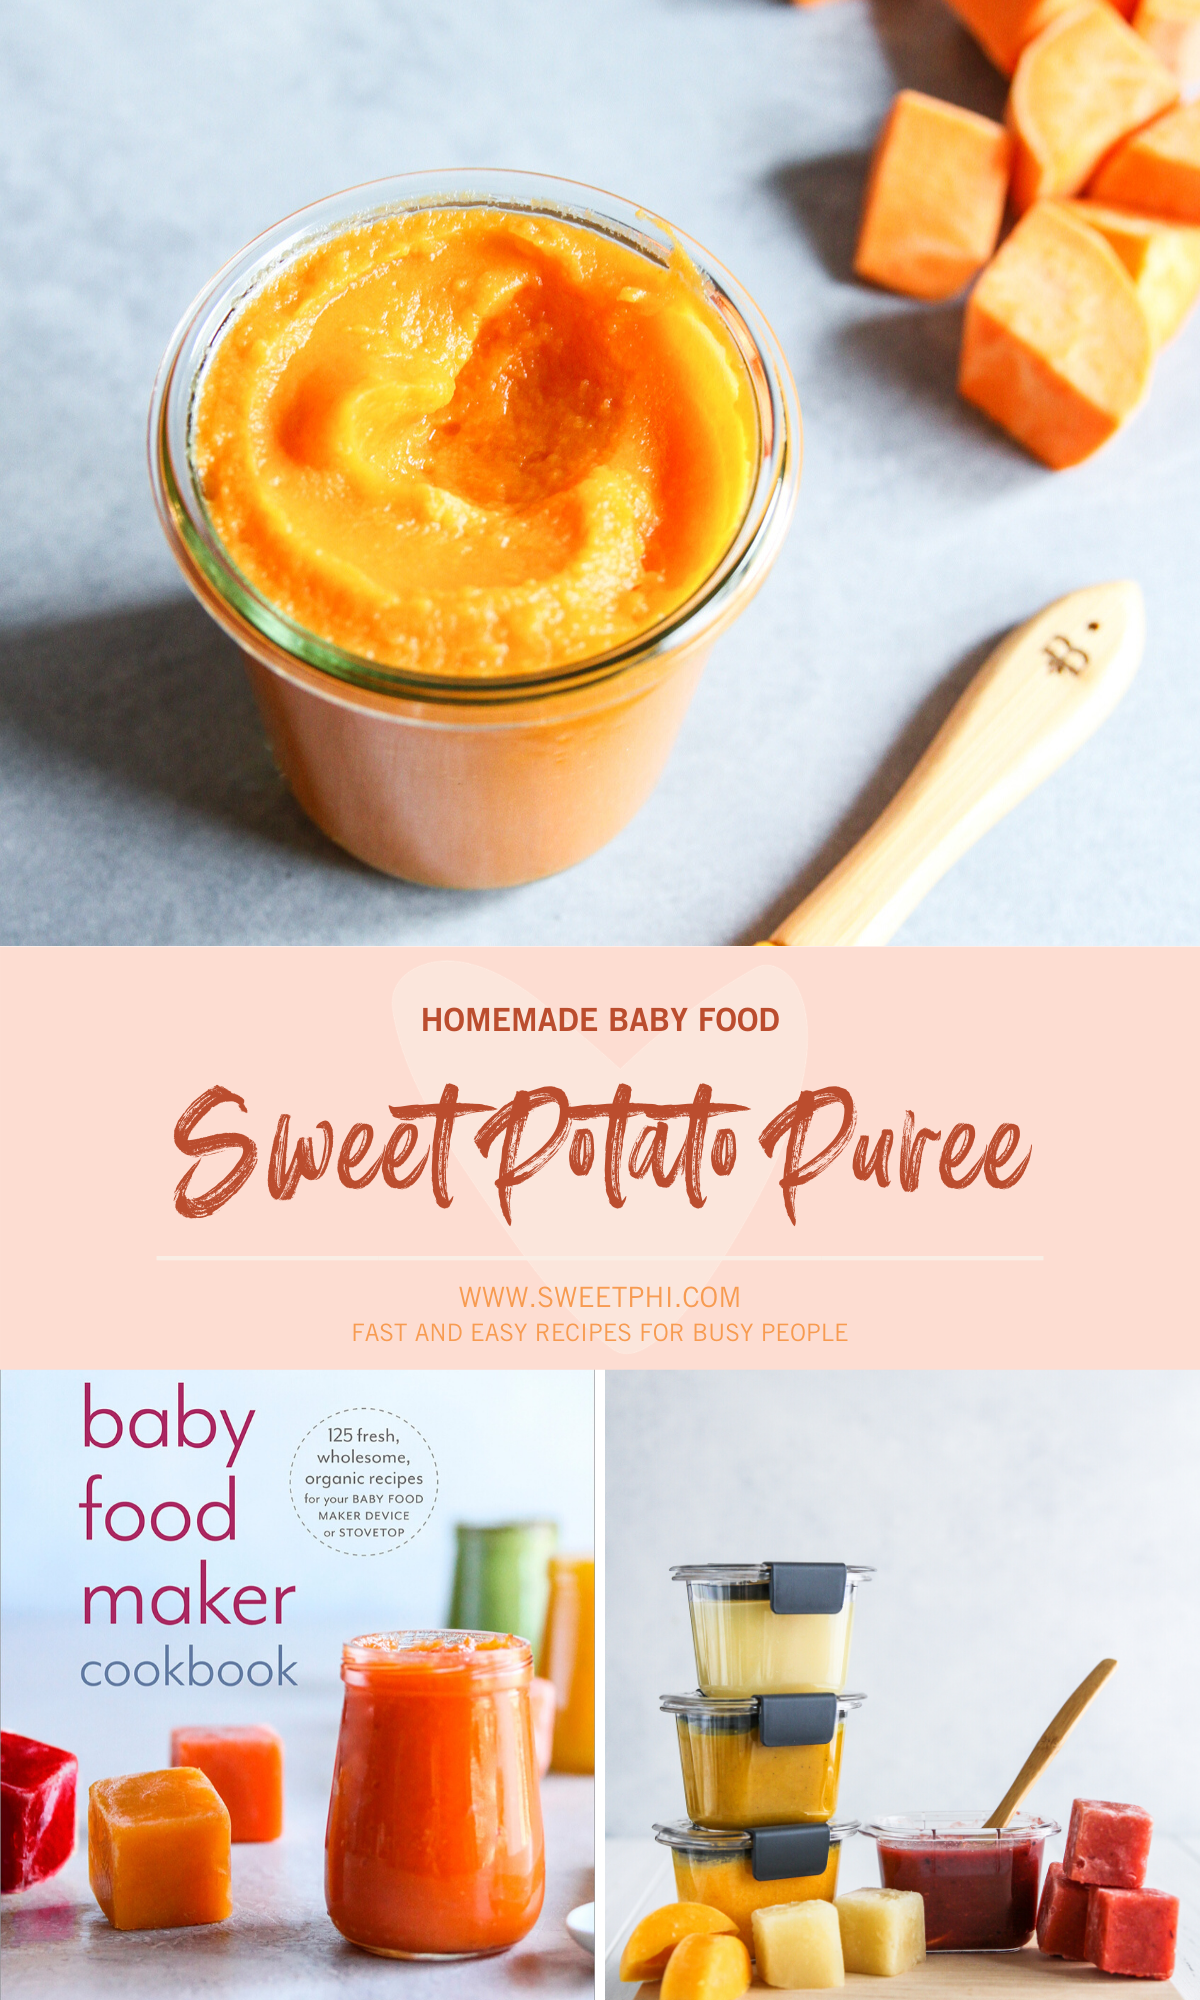 Homemade sweet potato puree for baby food or to use in other recipes